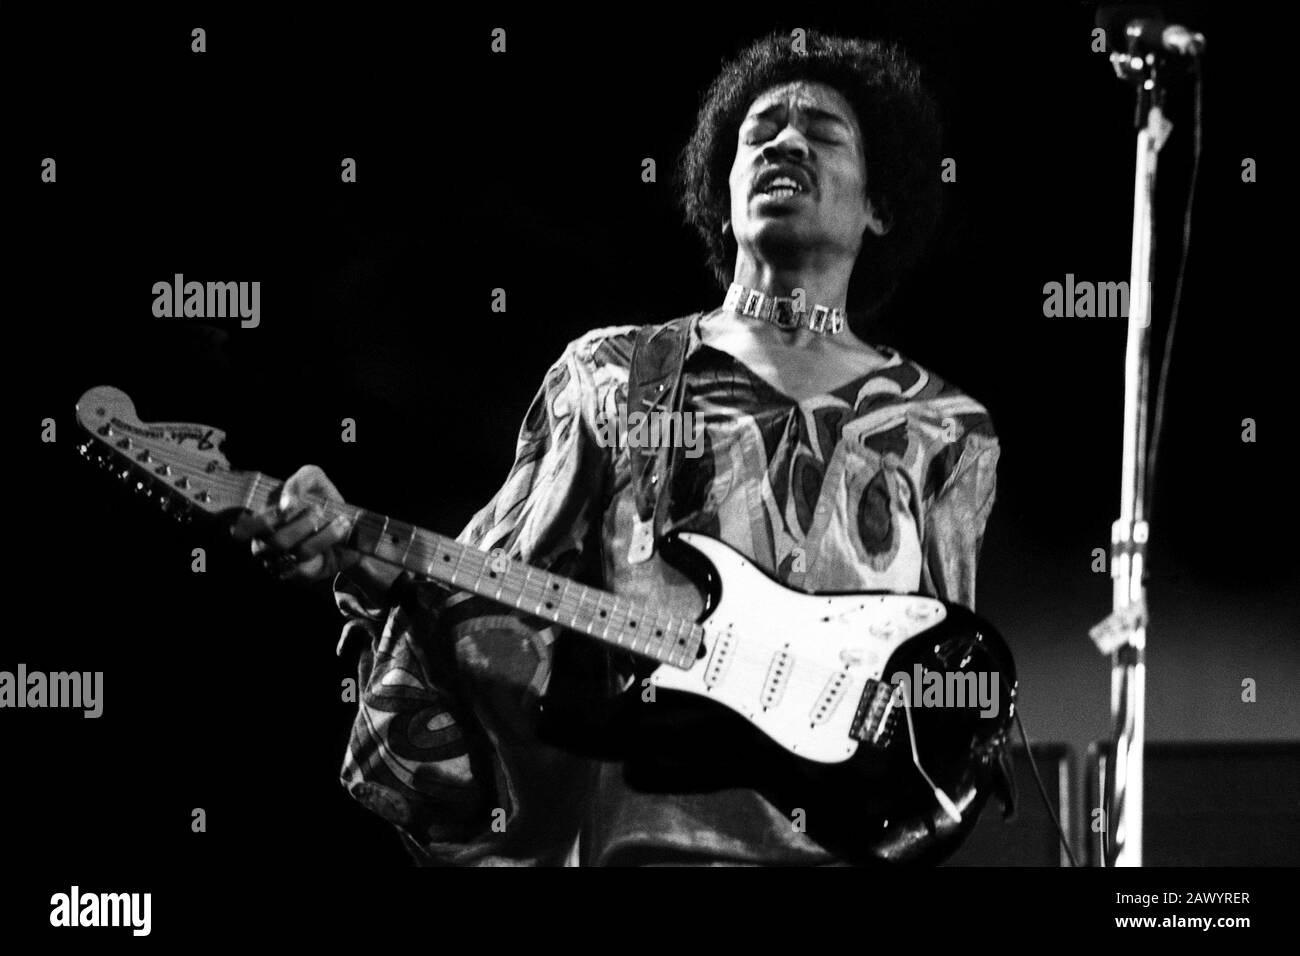 Jimi Hendrix at the famous Isle of Wight Festival in 1970, it is estimated that between 600 and 700,000 people attended. Sunday, August 30, 1970 Stock Photo